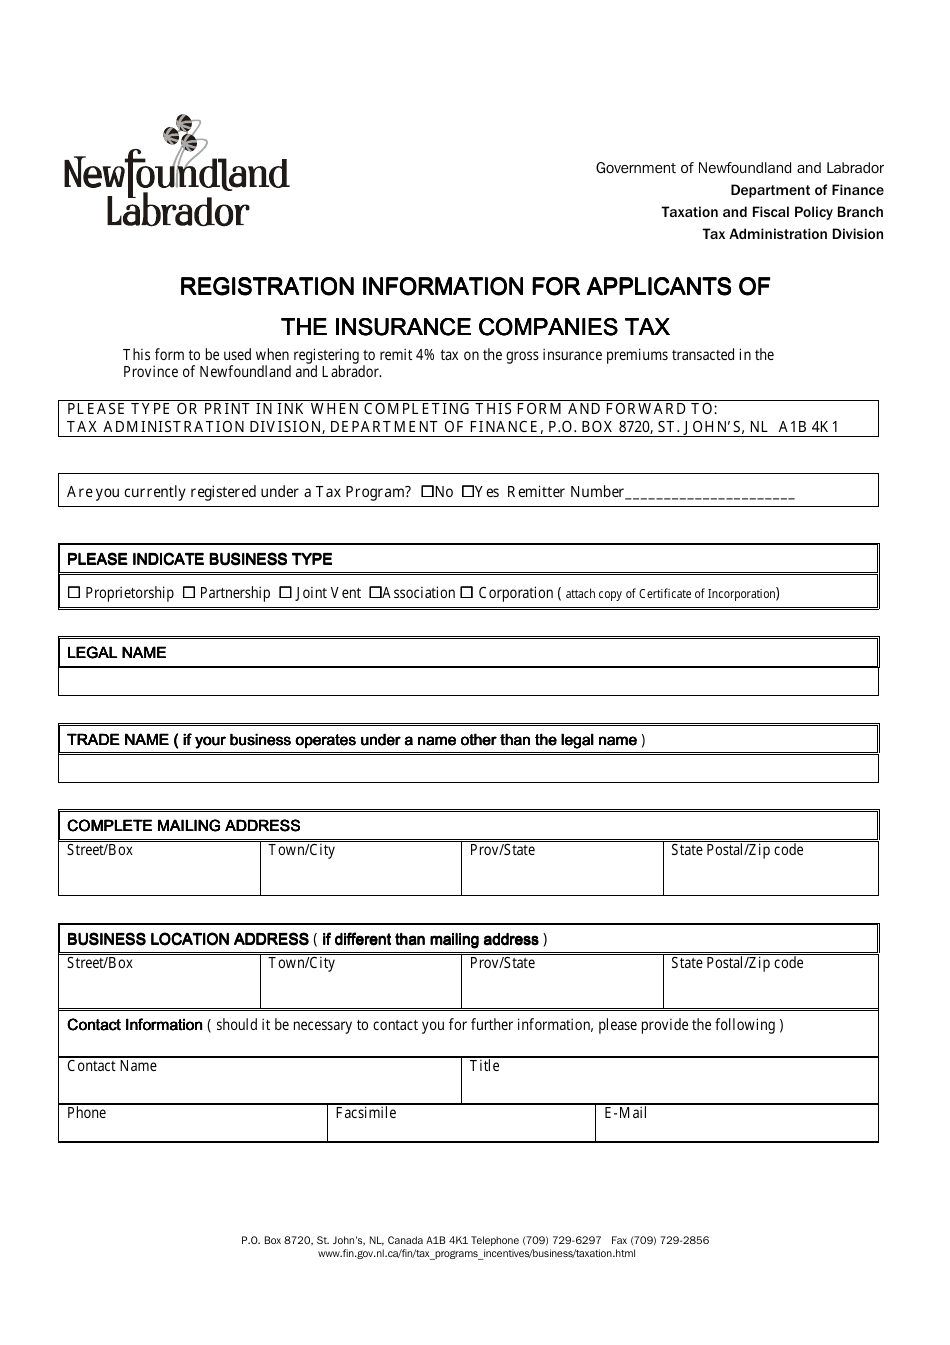 Registration Information for Applicants of the Insurance Companies Tax - Newfoundland and Labrador, Canada, Page 1